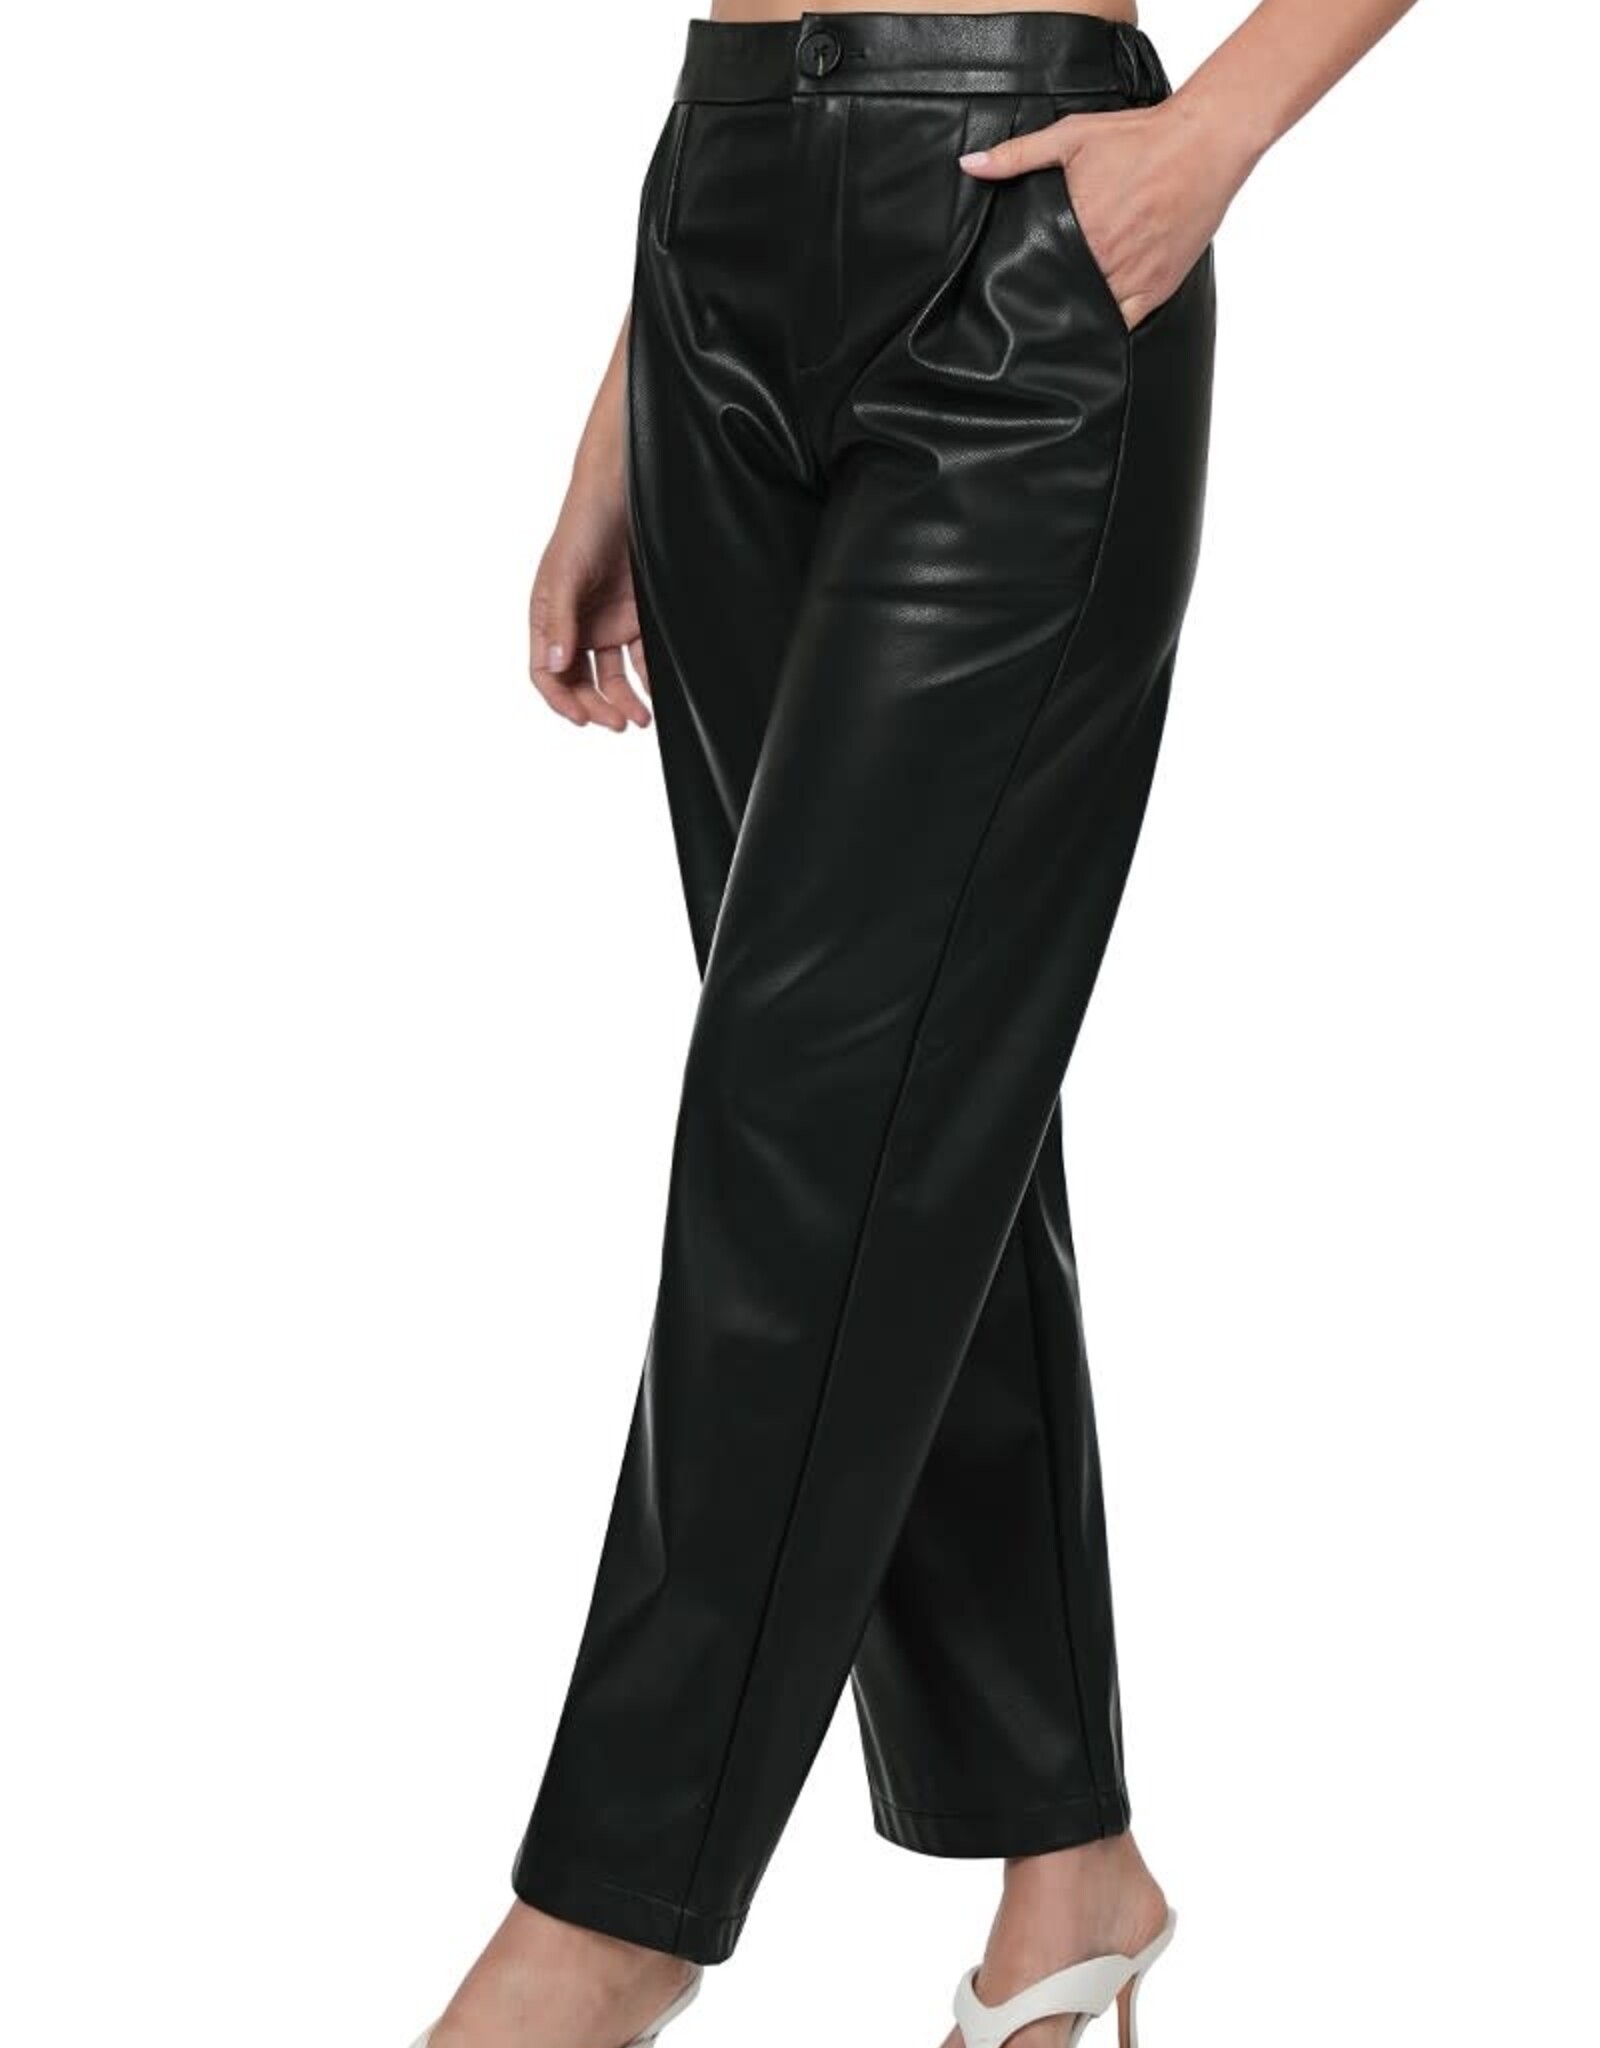 Miss Bliss High Waisted Faux Leather Pants- Black